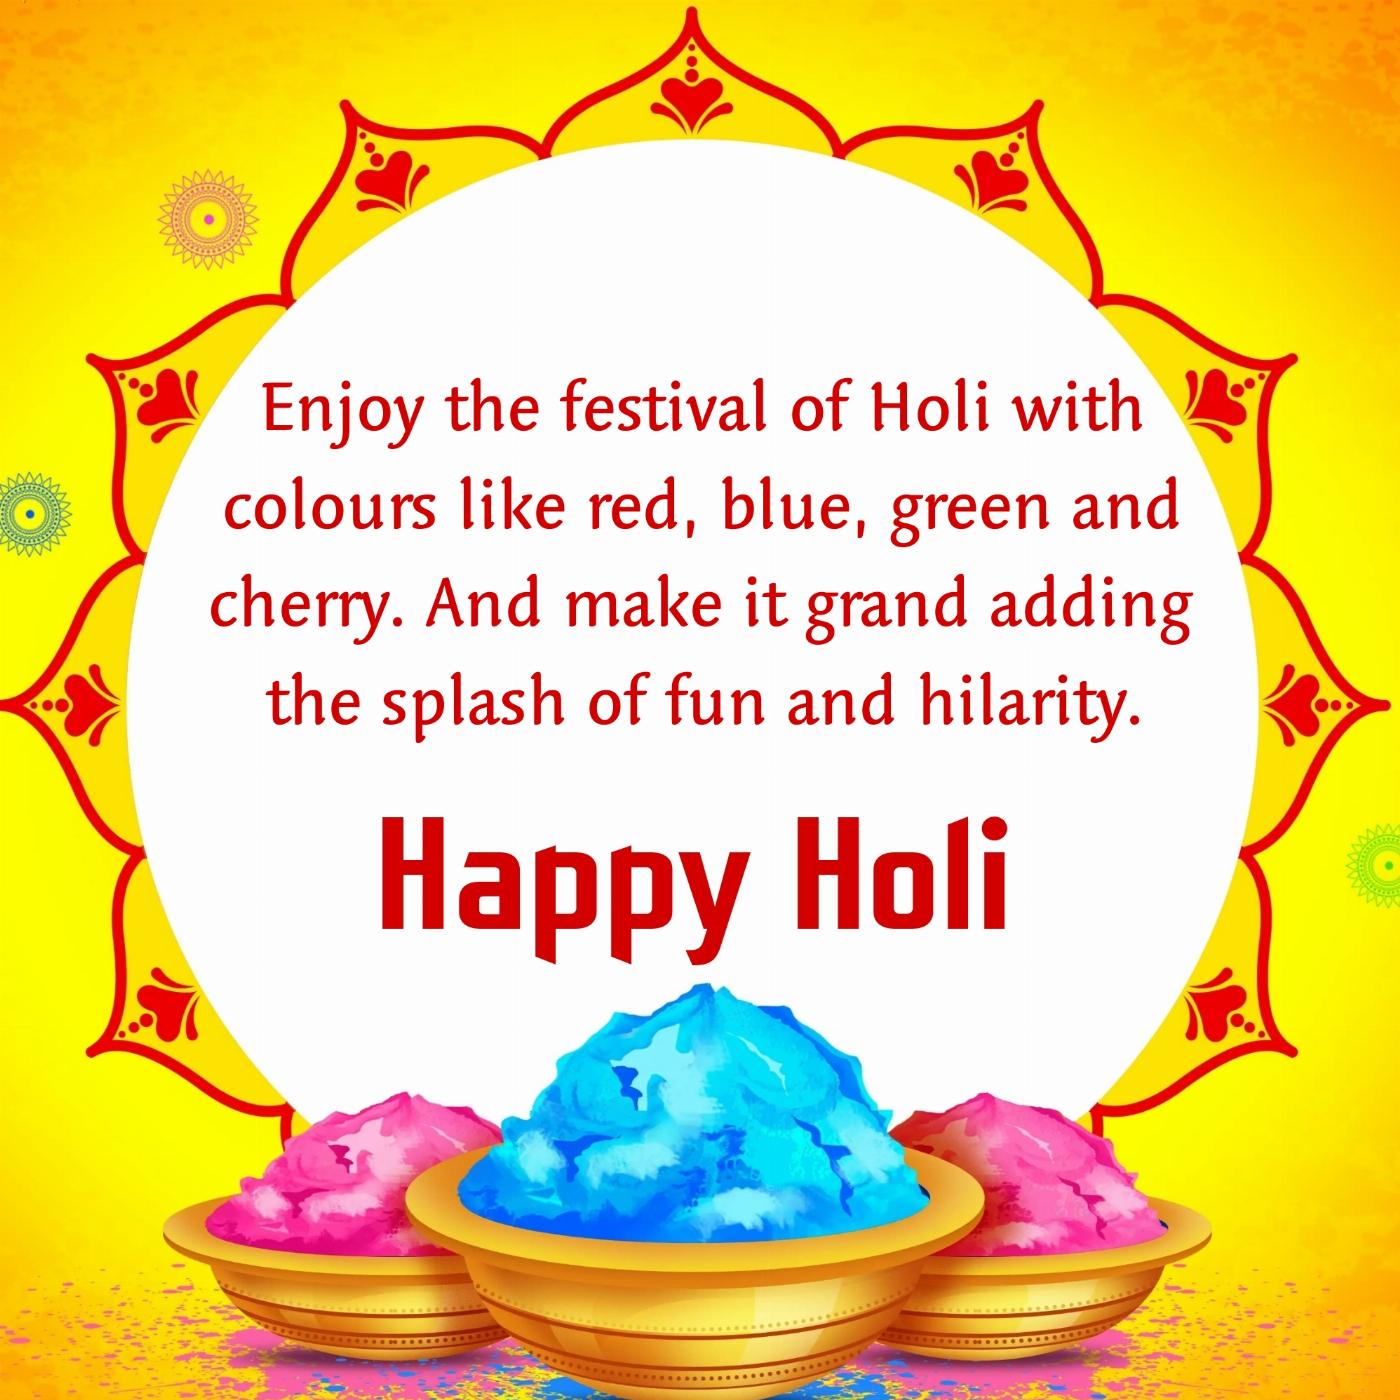 Enjoy the festival of Holi with colours like red blue green 